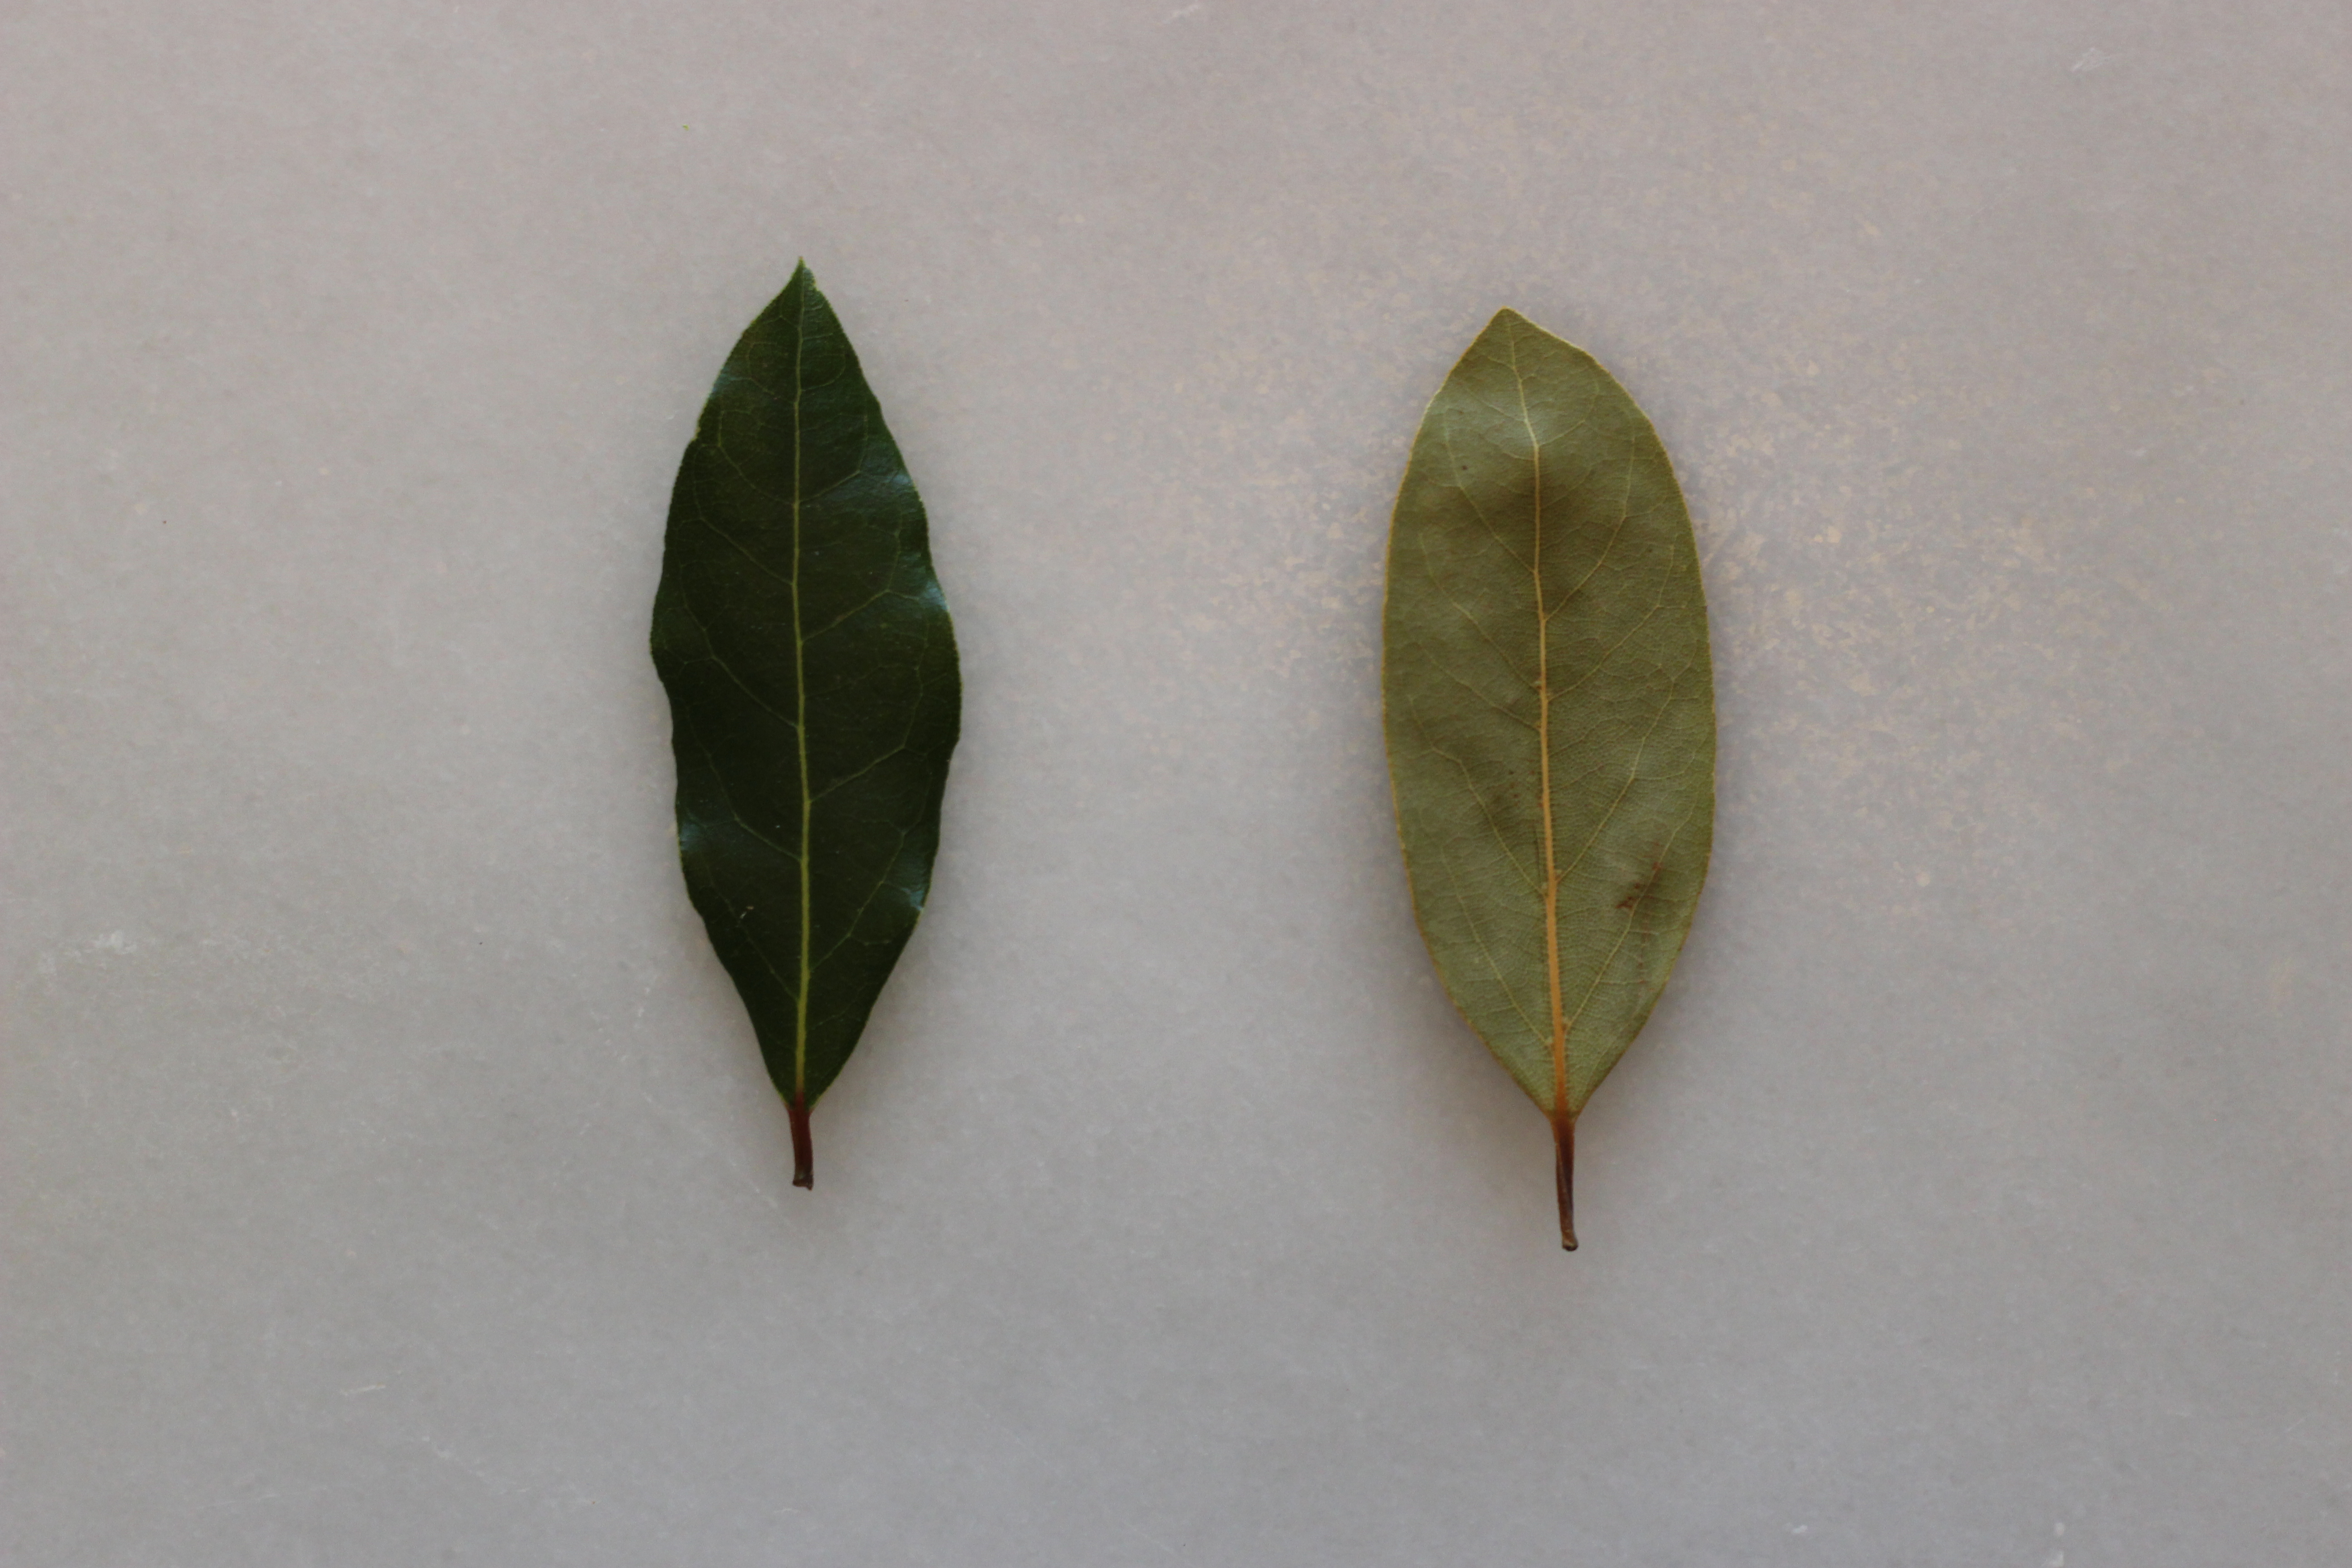 Do Bay Leaves Even Do Anything?